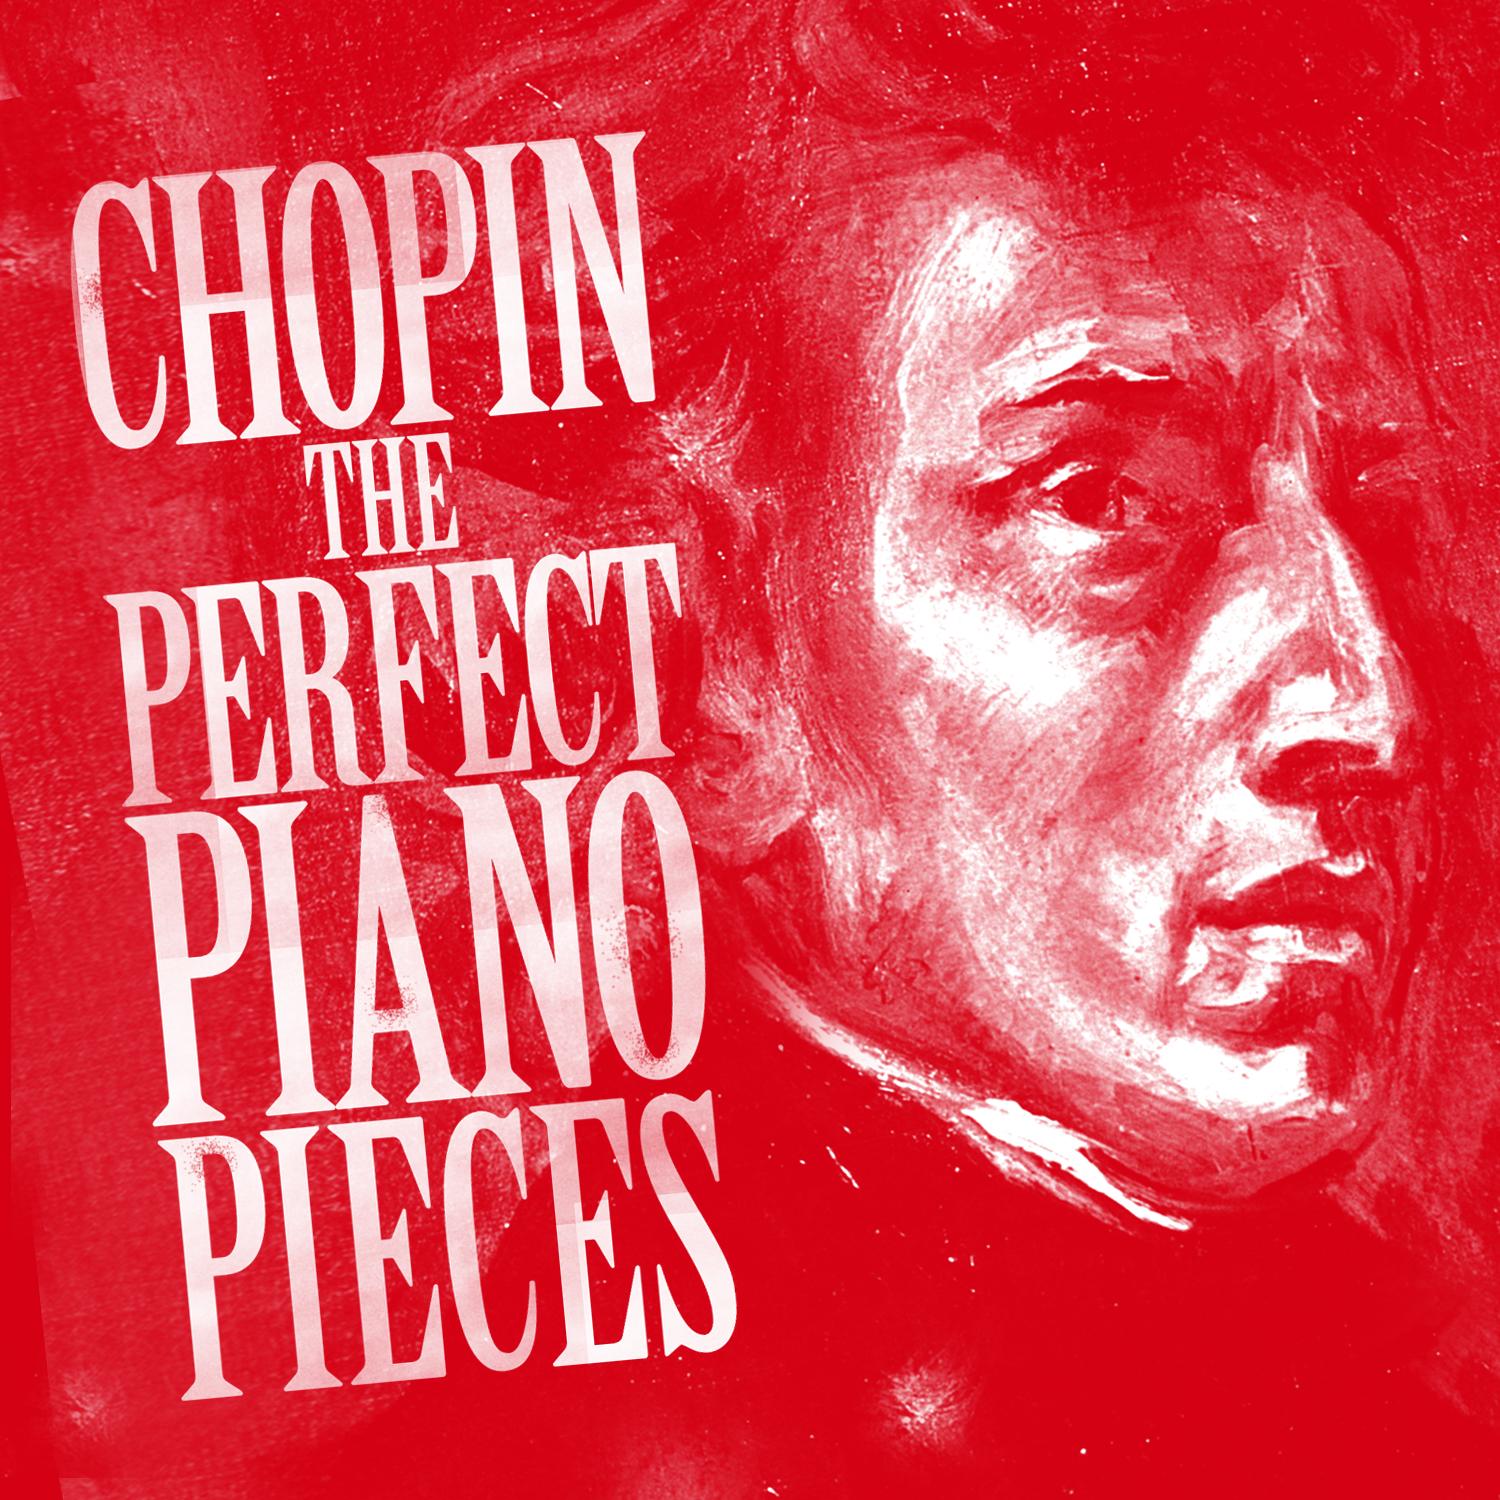 Chopin: The Perfect Piano Pieces